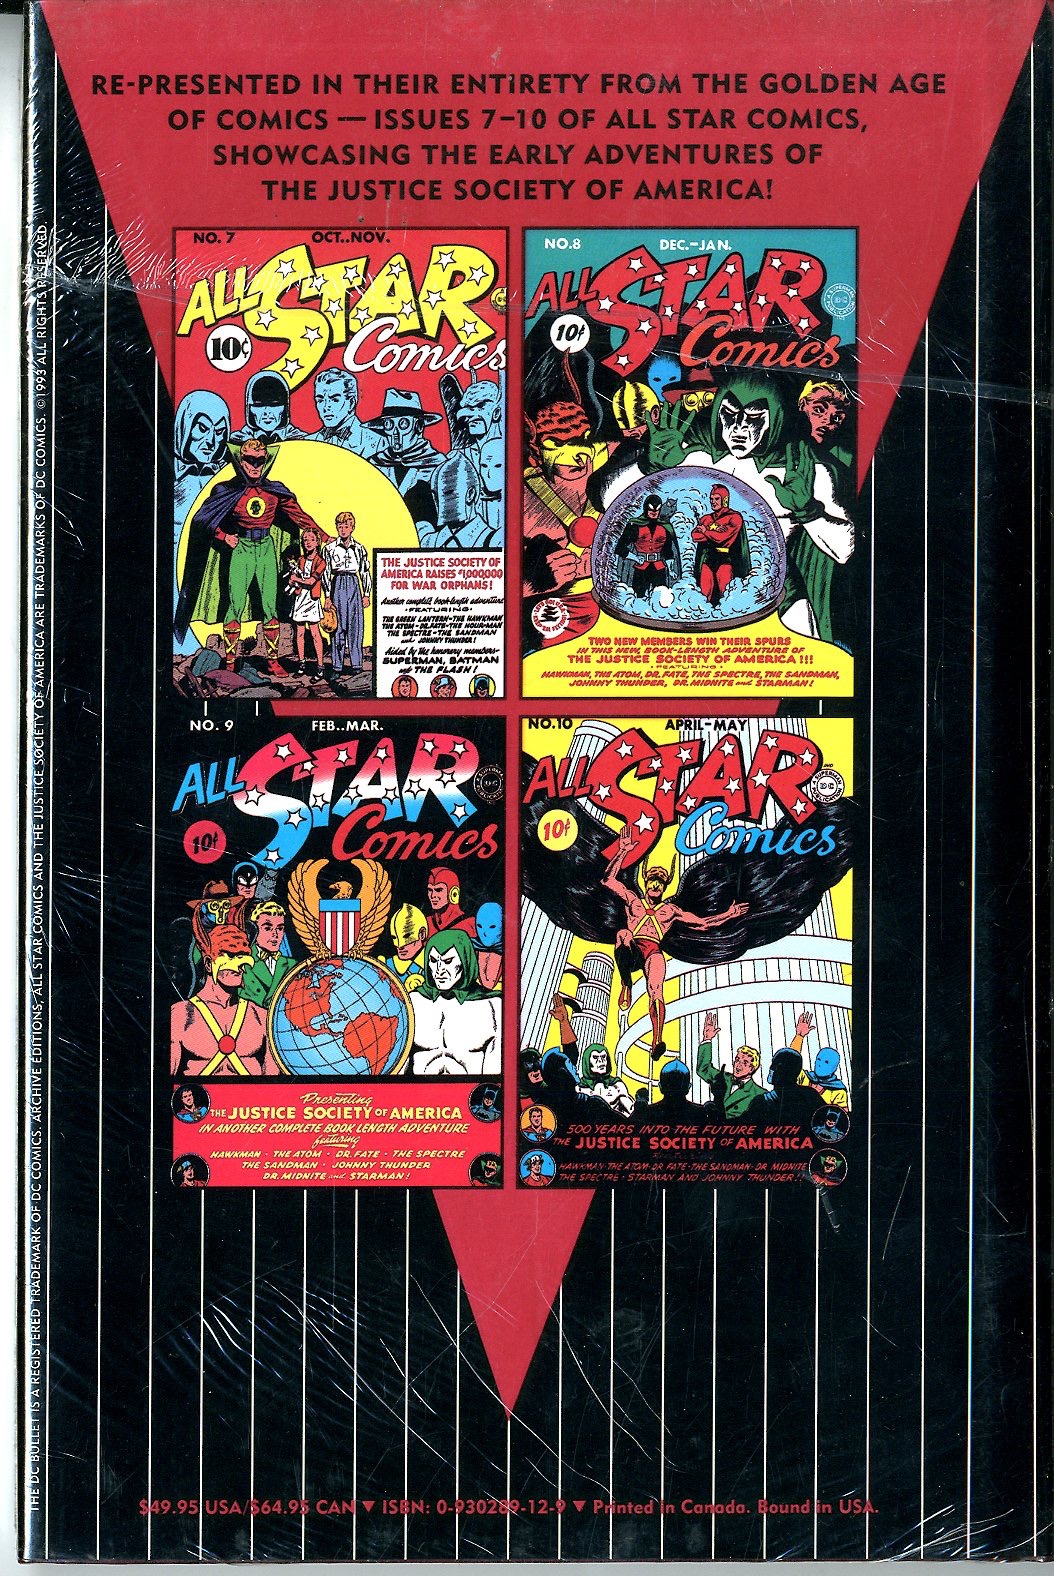 Archive Editions All Star Comics - 11243